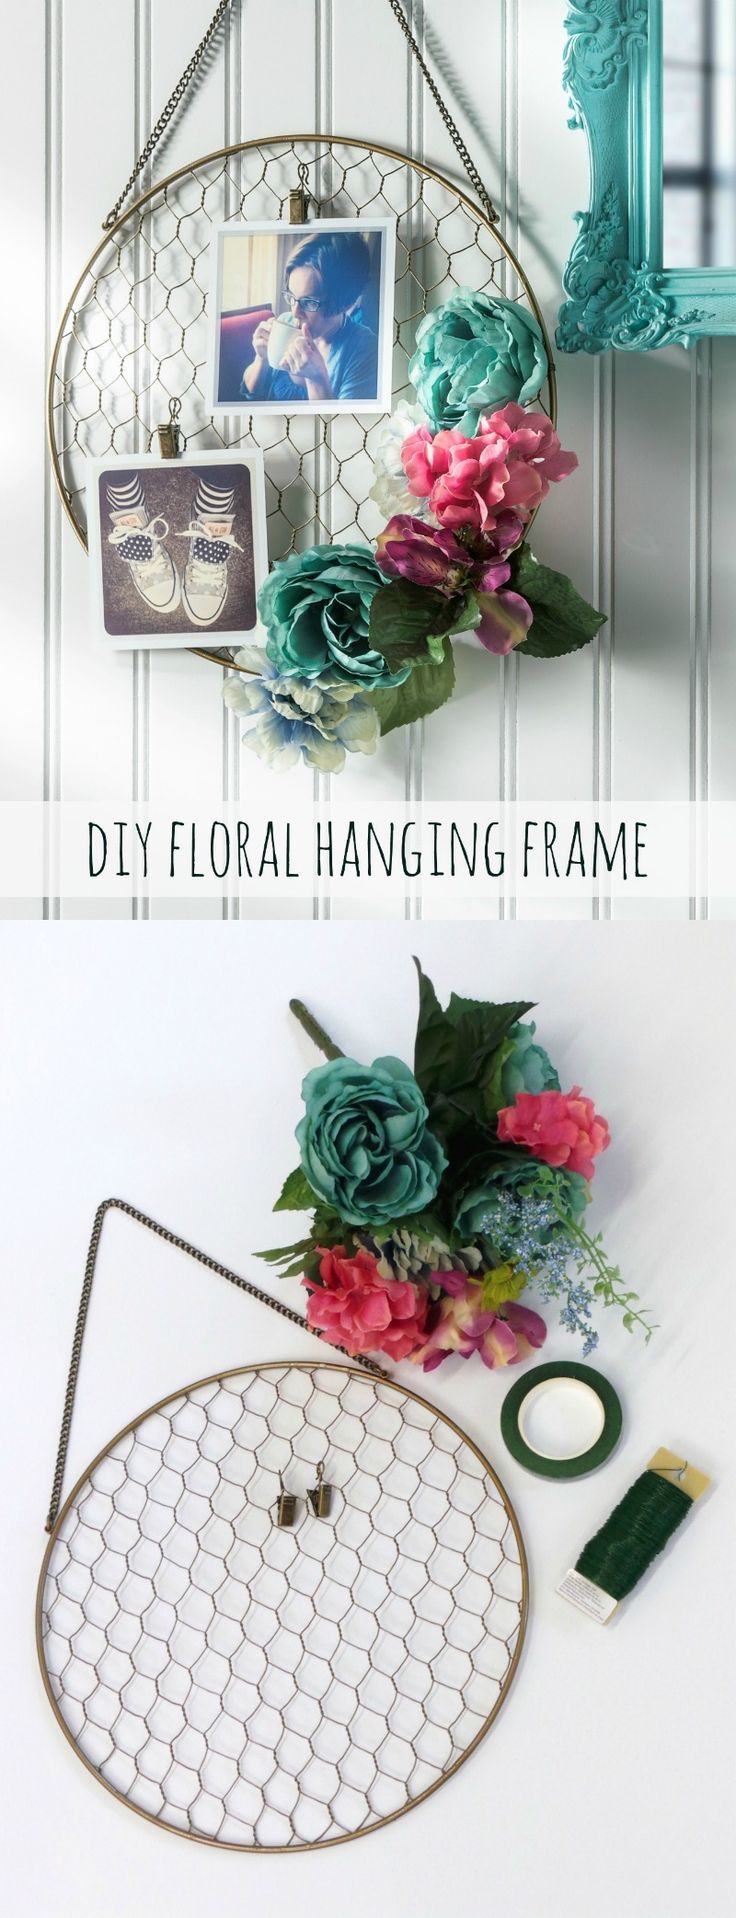 Jazz up a wire hanging photo holder with faux flowers in this unique DIY floral ...